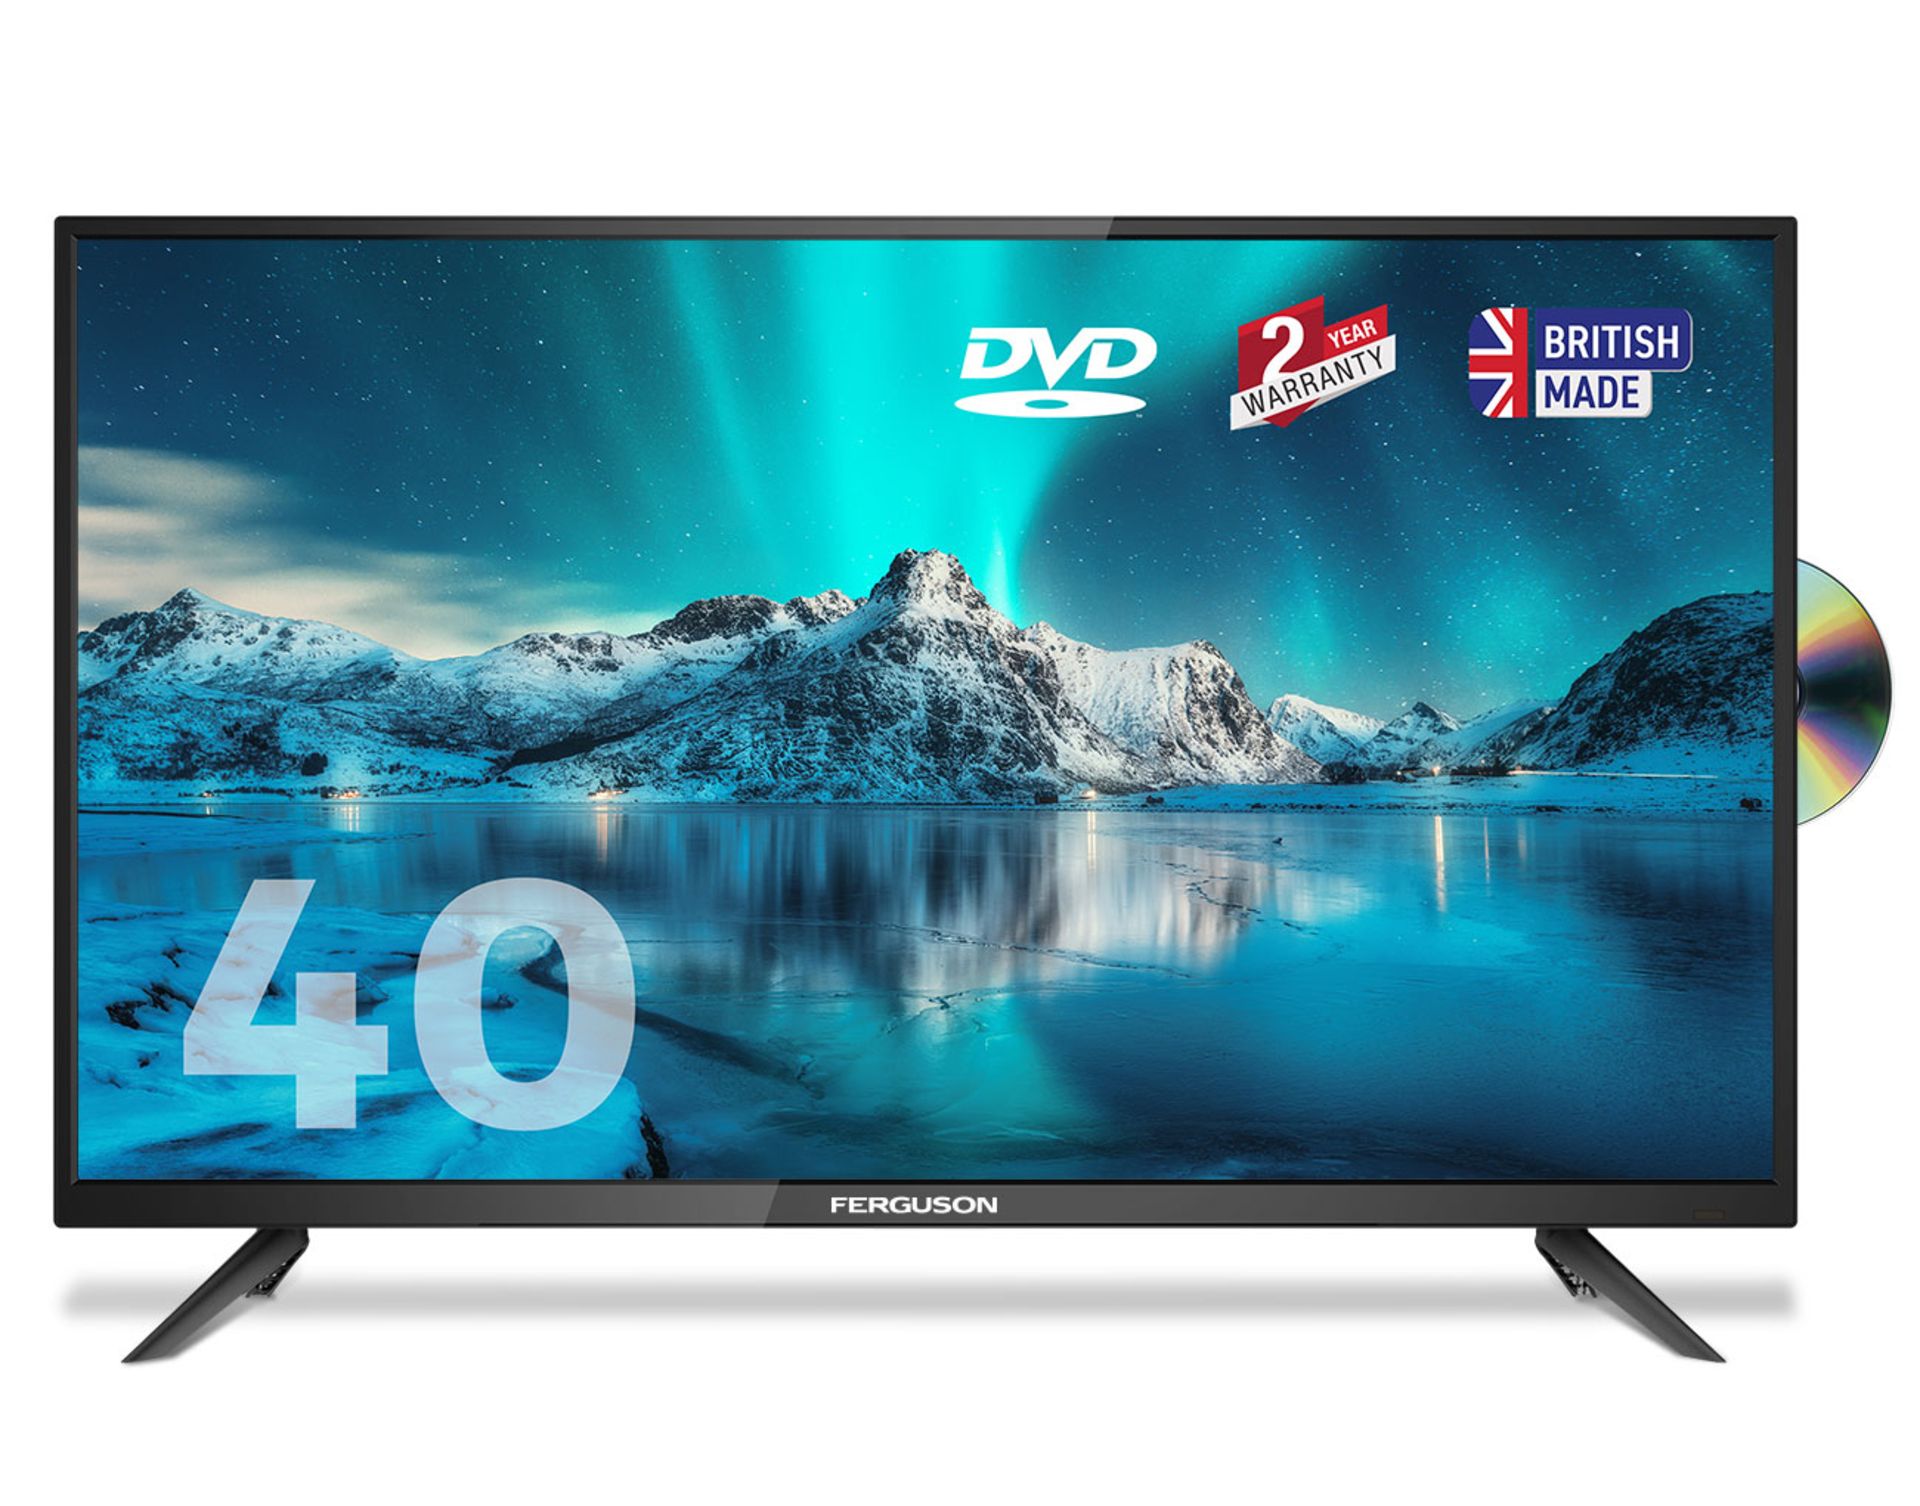 FEGUSON 40 inch Full HD LED TV With DVD player. (PW). A superb TV packed with convenient features